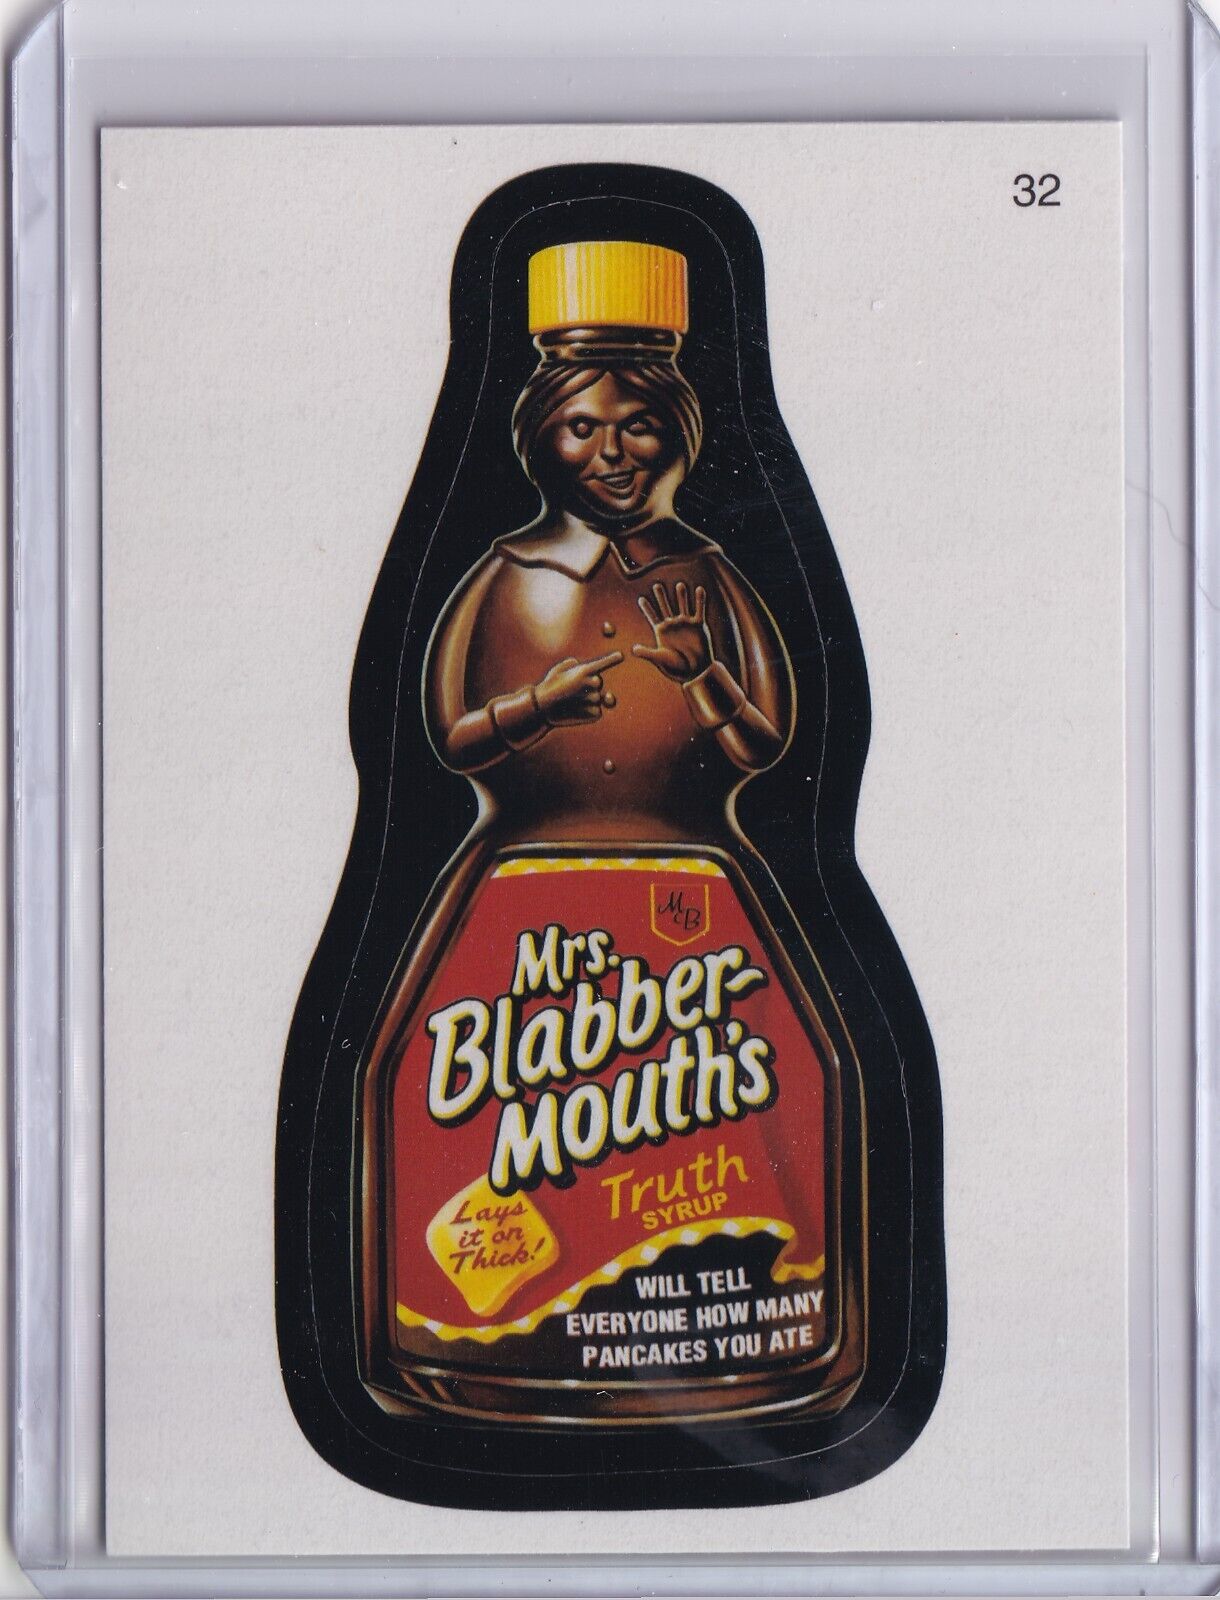 2010 Topps Wacky Packages Series 7 Mrs. Blabber-Mouths Truth Syrup #32